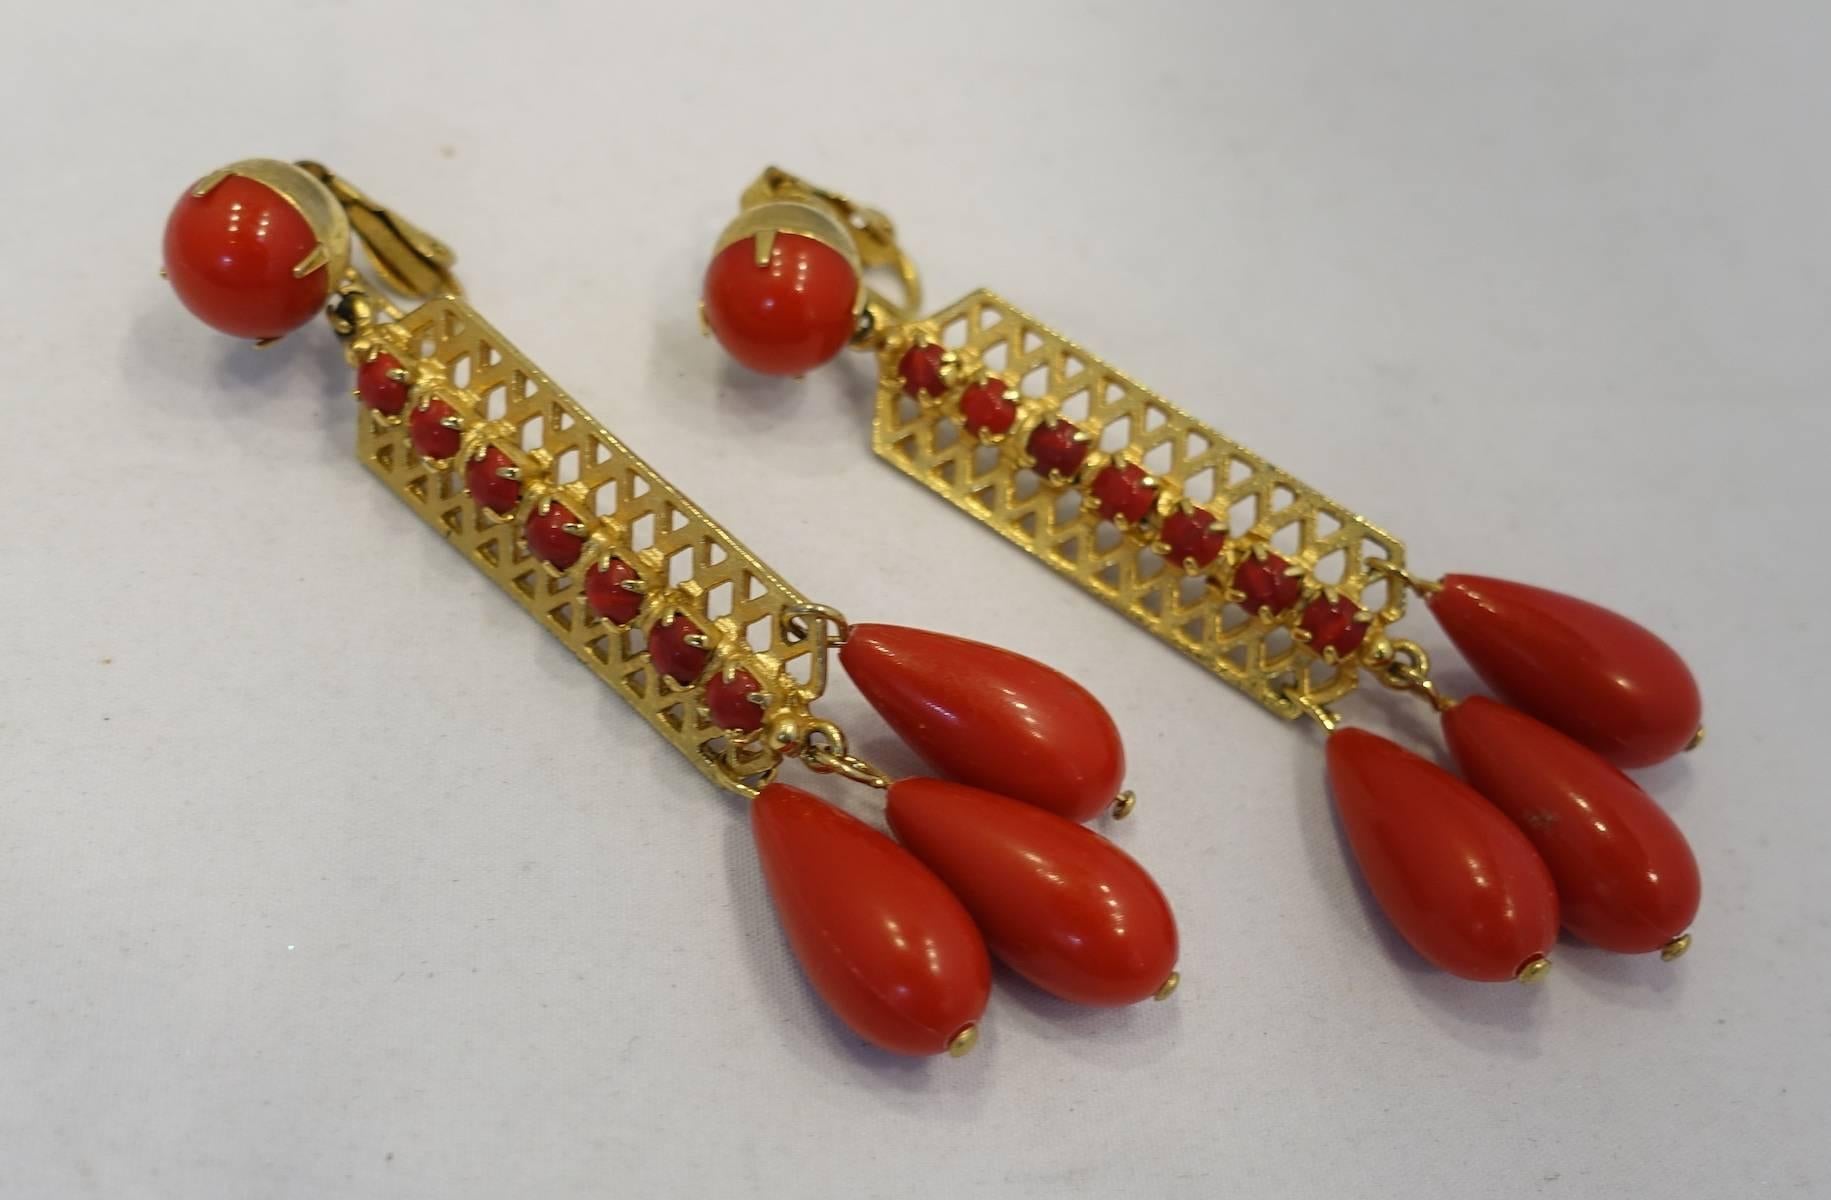 These vintage 1960s dangling earrings feature a round red bead on top with a long gold tone center with red beads in the center.  At the bottom are three red beads hanging down. These clip earrings measure 3-1/2” x 1” and are in excellent condition.